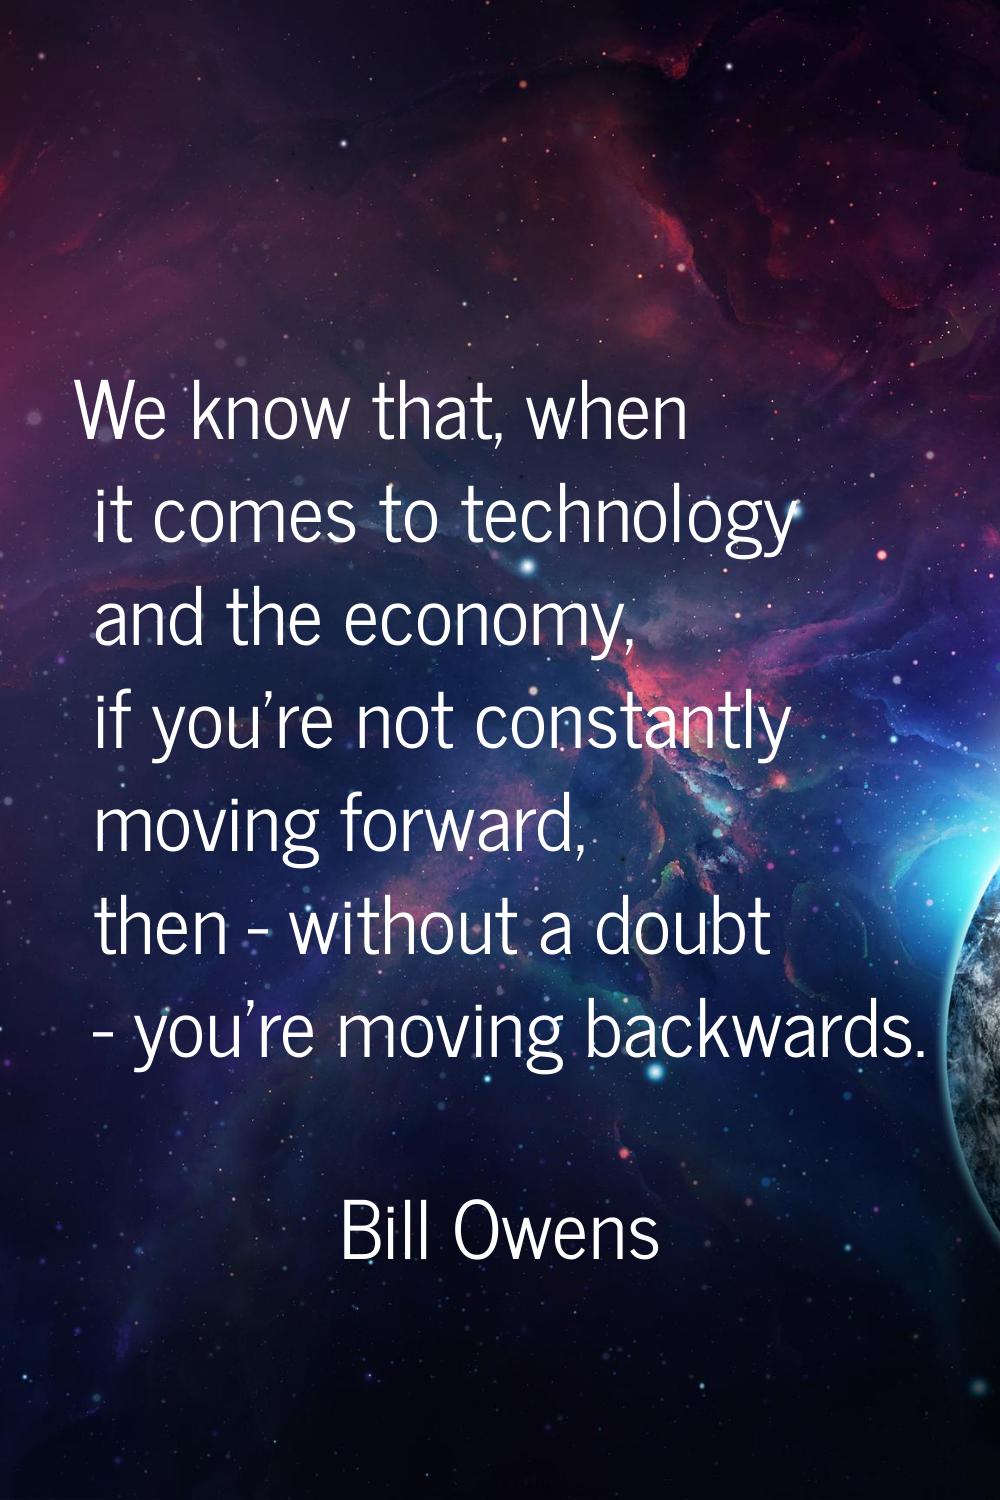 We know that, when it comes to technology and the economy, if you're not constantly moving forward,